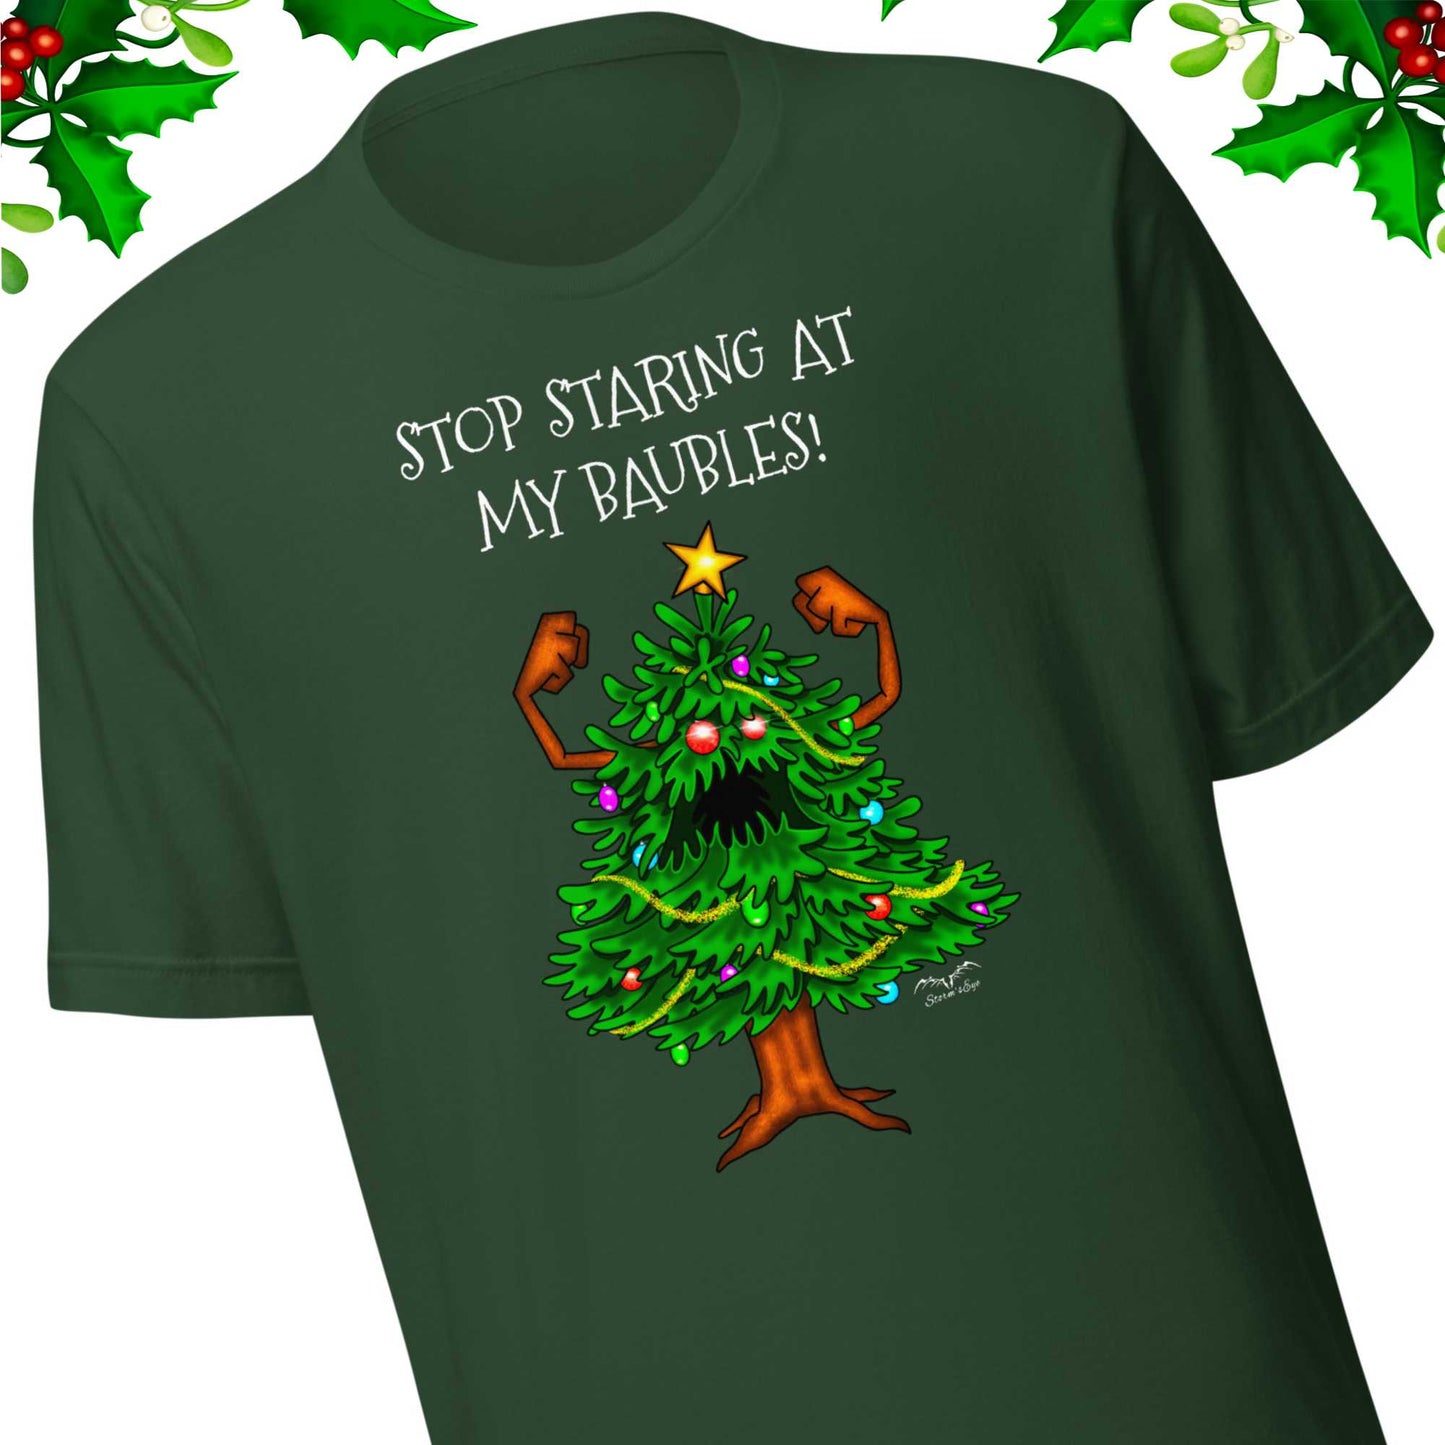 stormseye design angry christmas tree baubles T shirt, detail view forest green